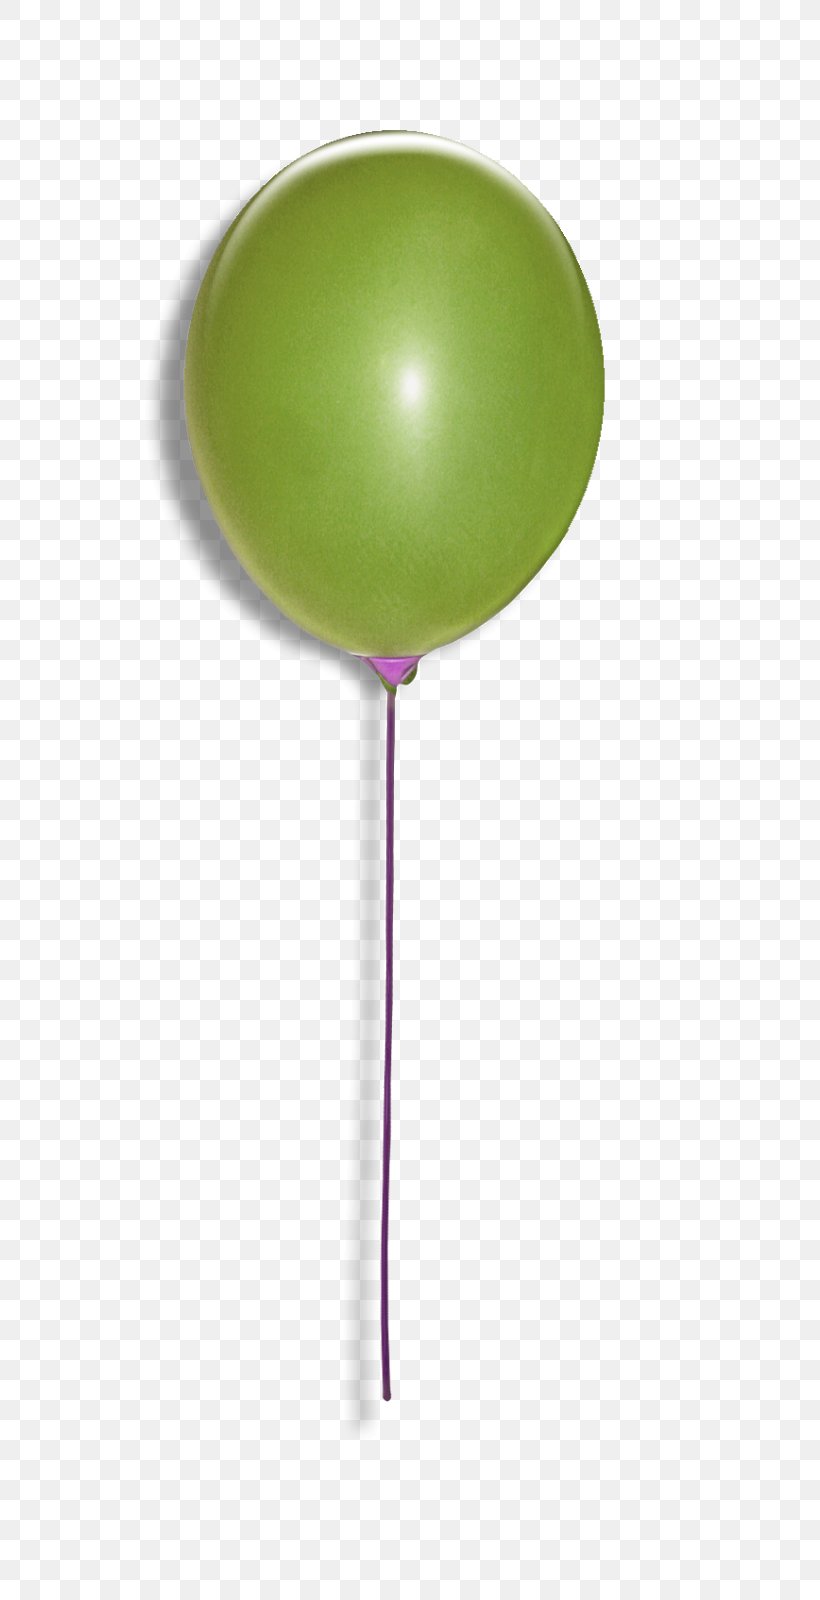 Green Balloon, PNG, 742x1600px, Green, Balloon Download Free